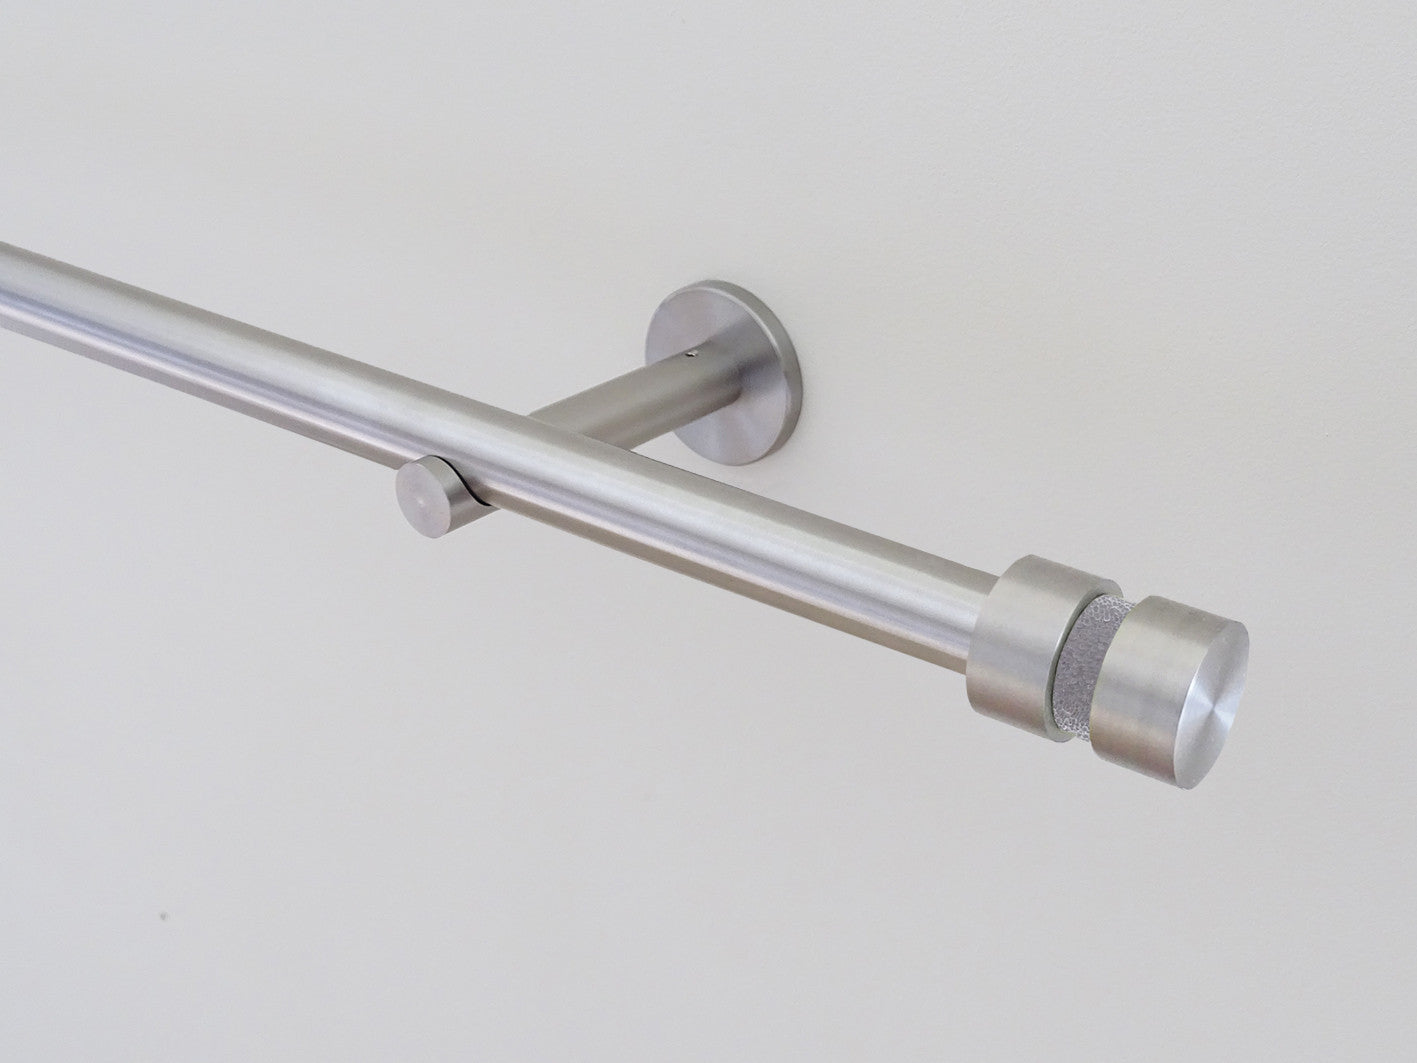 19mm diameter stainless steel metal curtain pole set with oyster groove finials